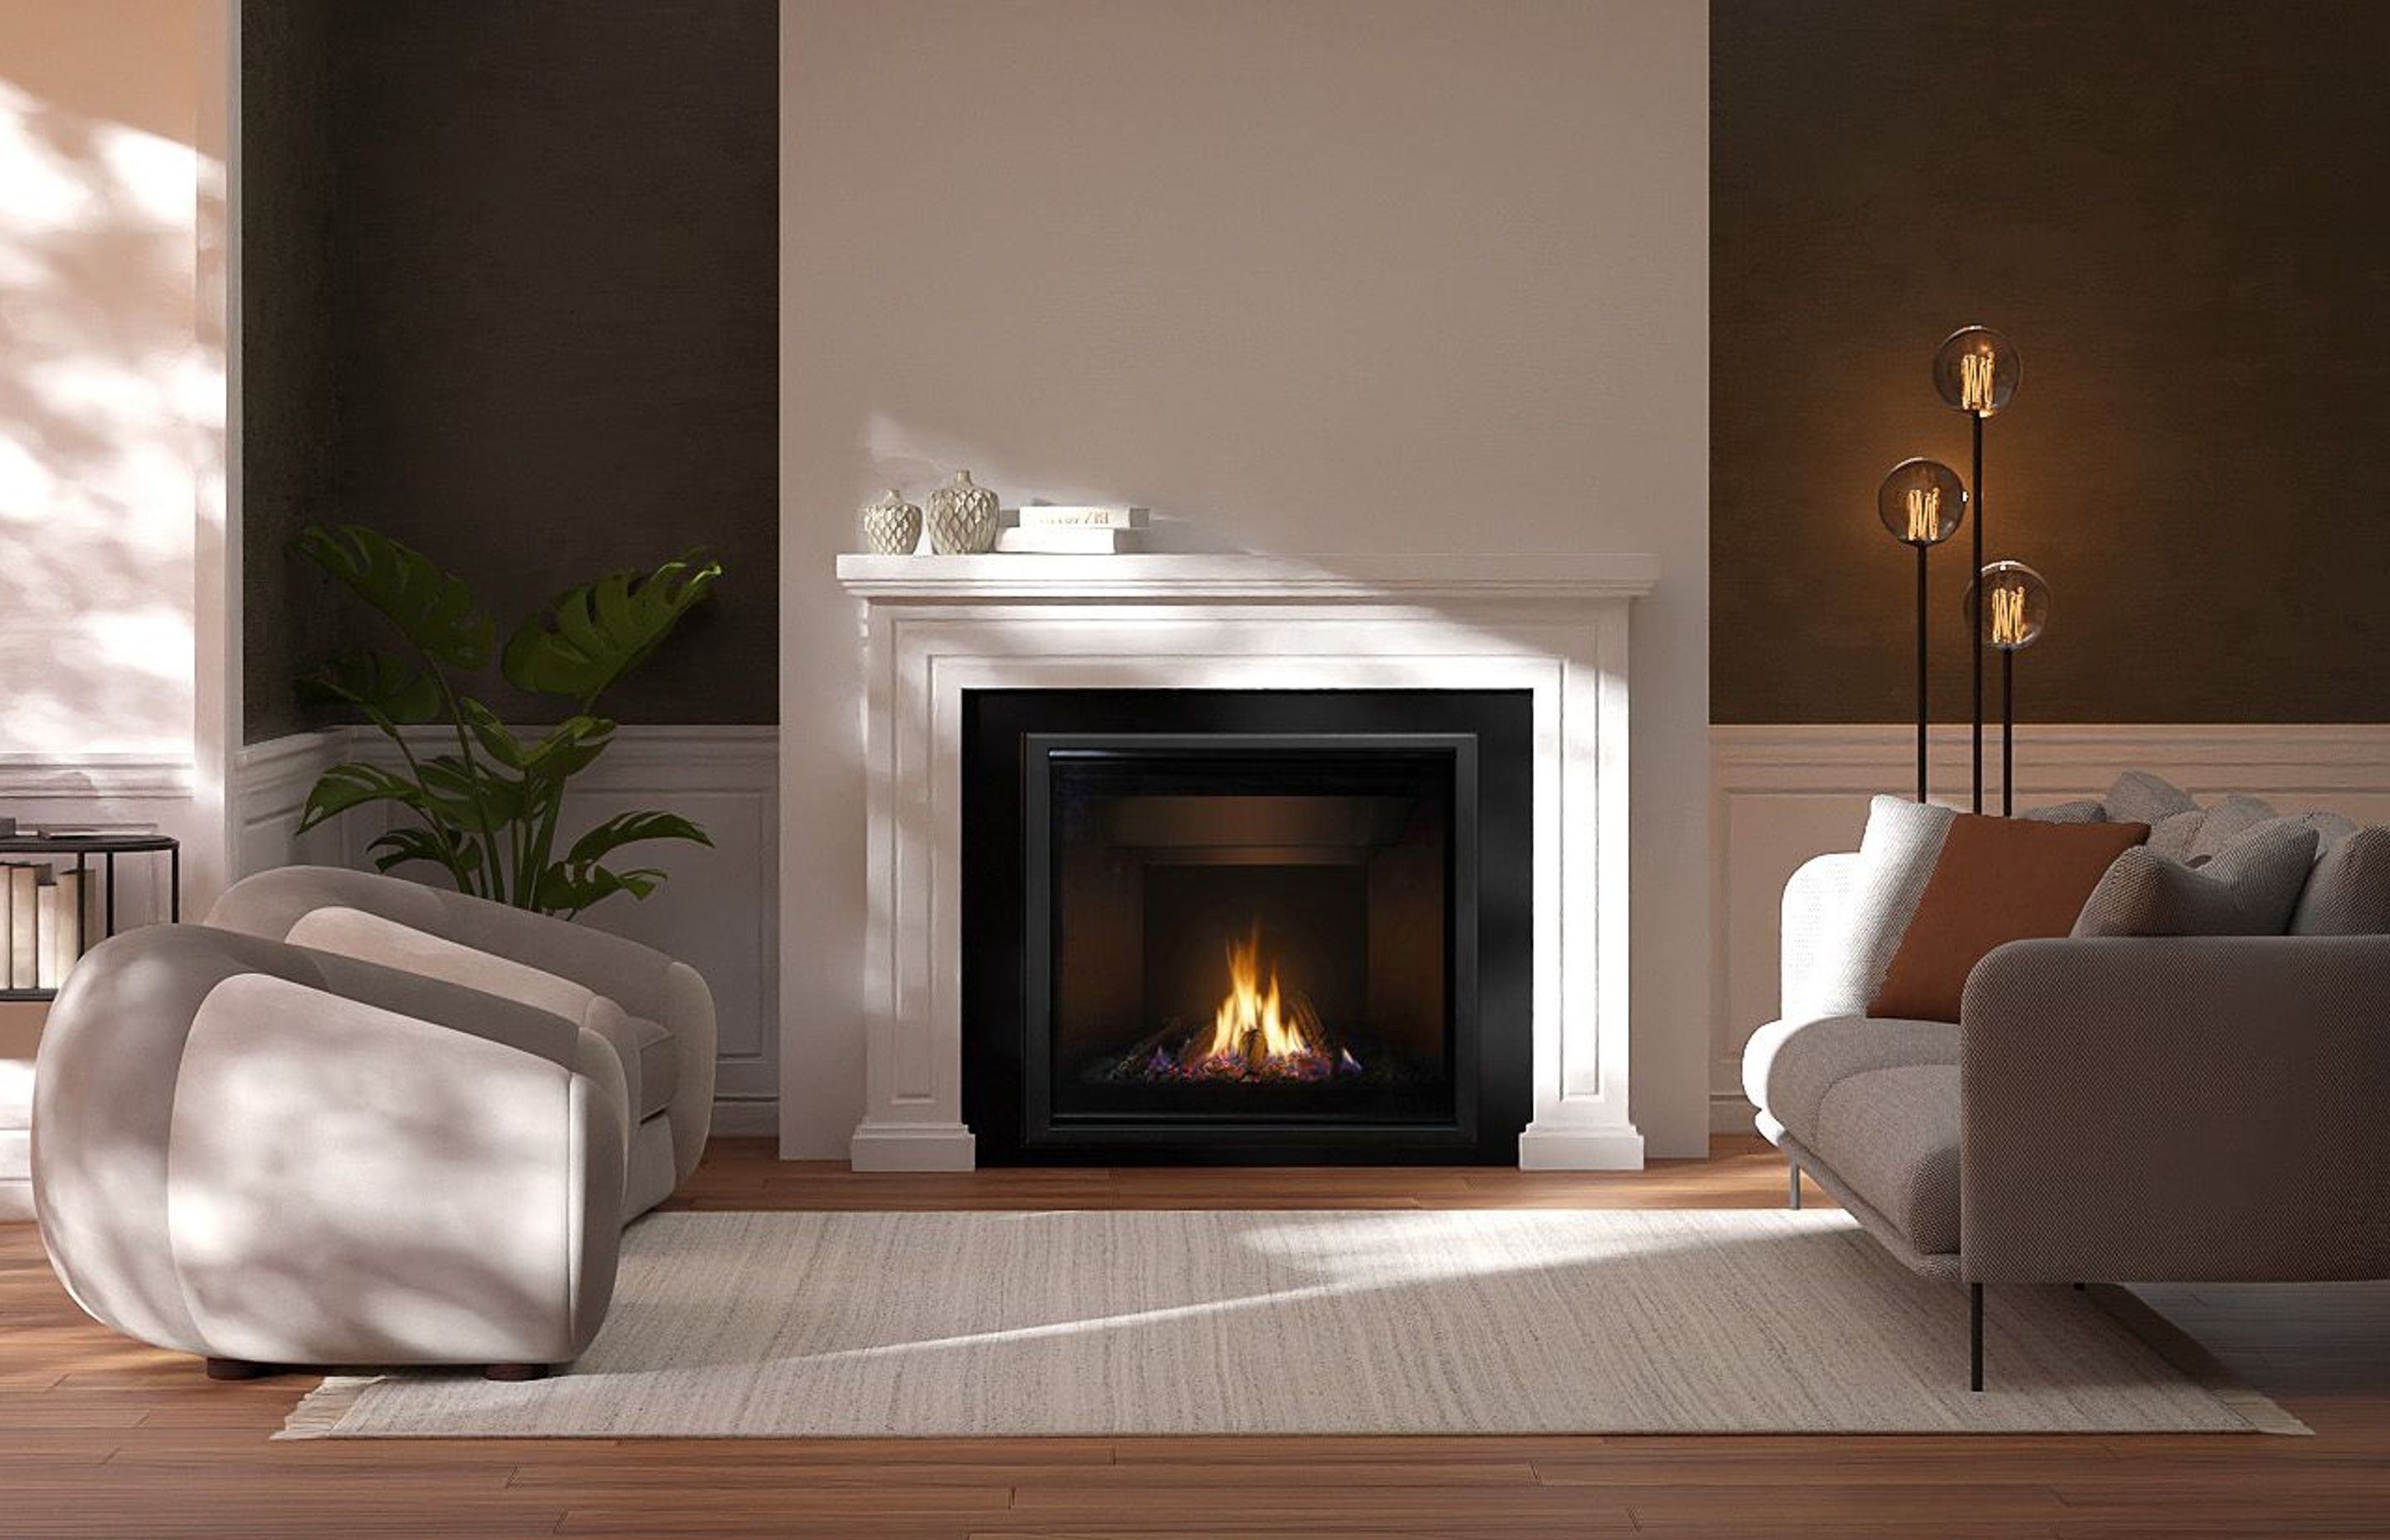 Escea DF990 Gas Fireplace - With an extended window height of 680mm, the DF990 makes a bold statement.